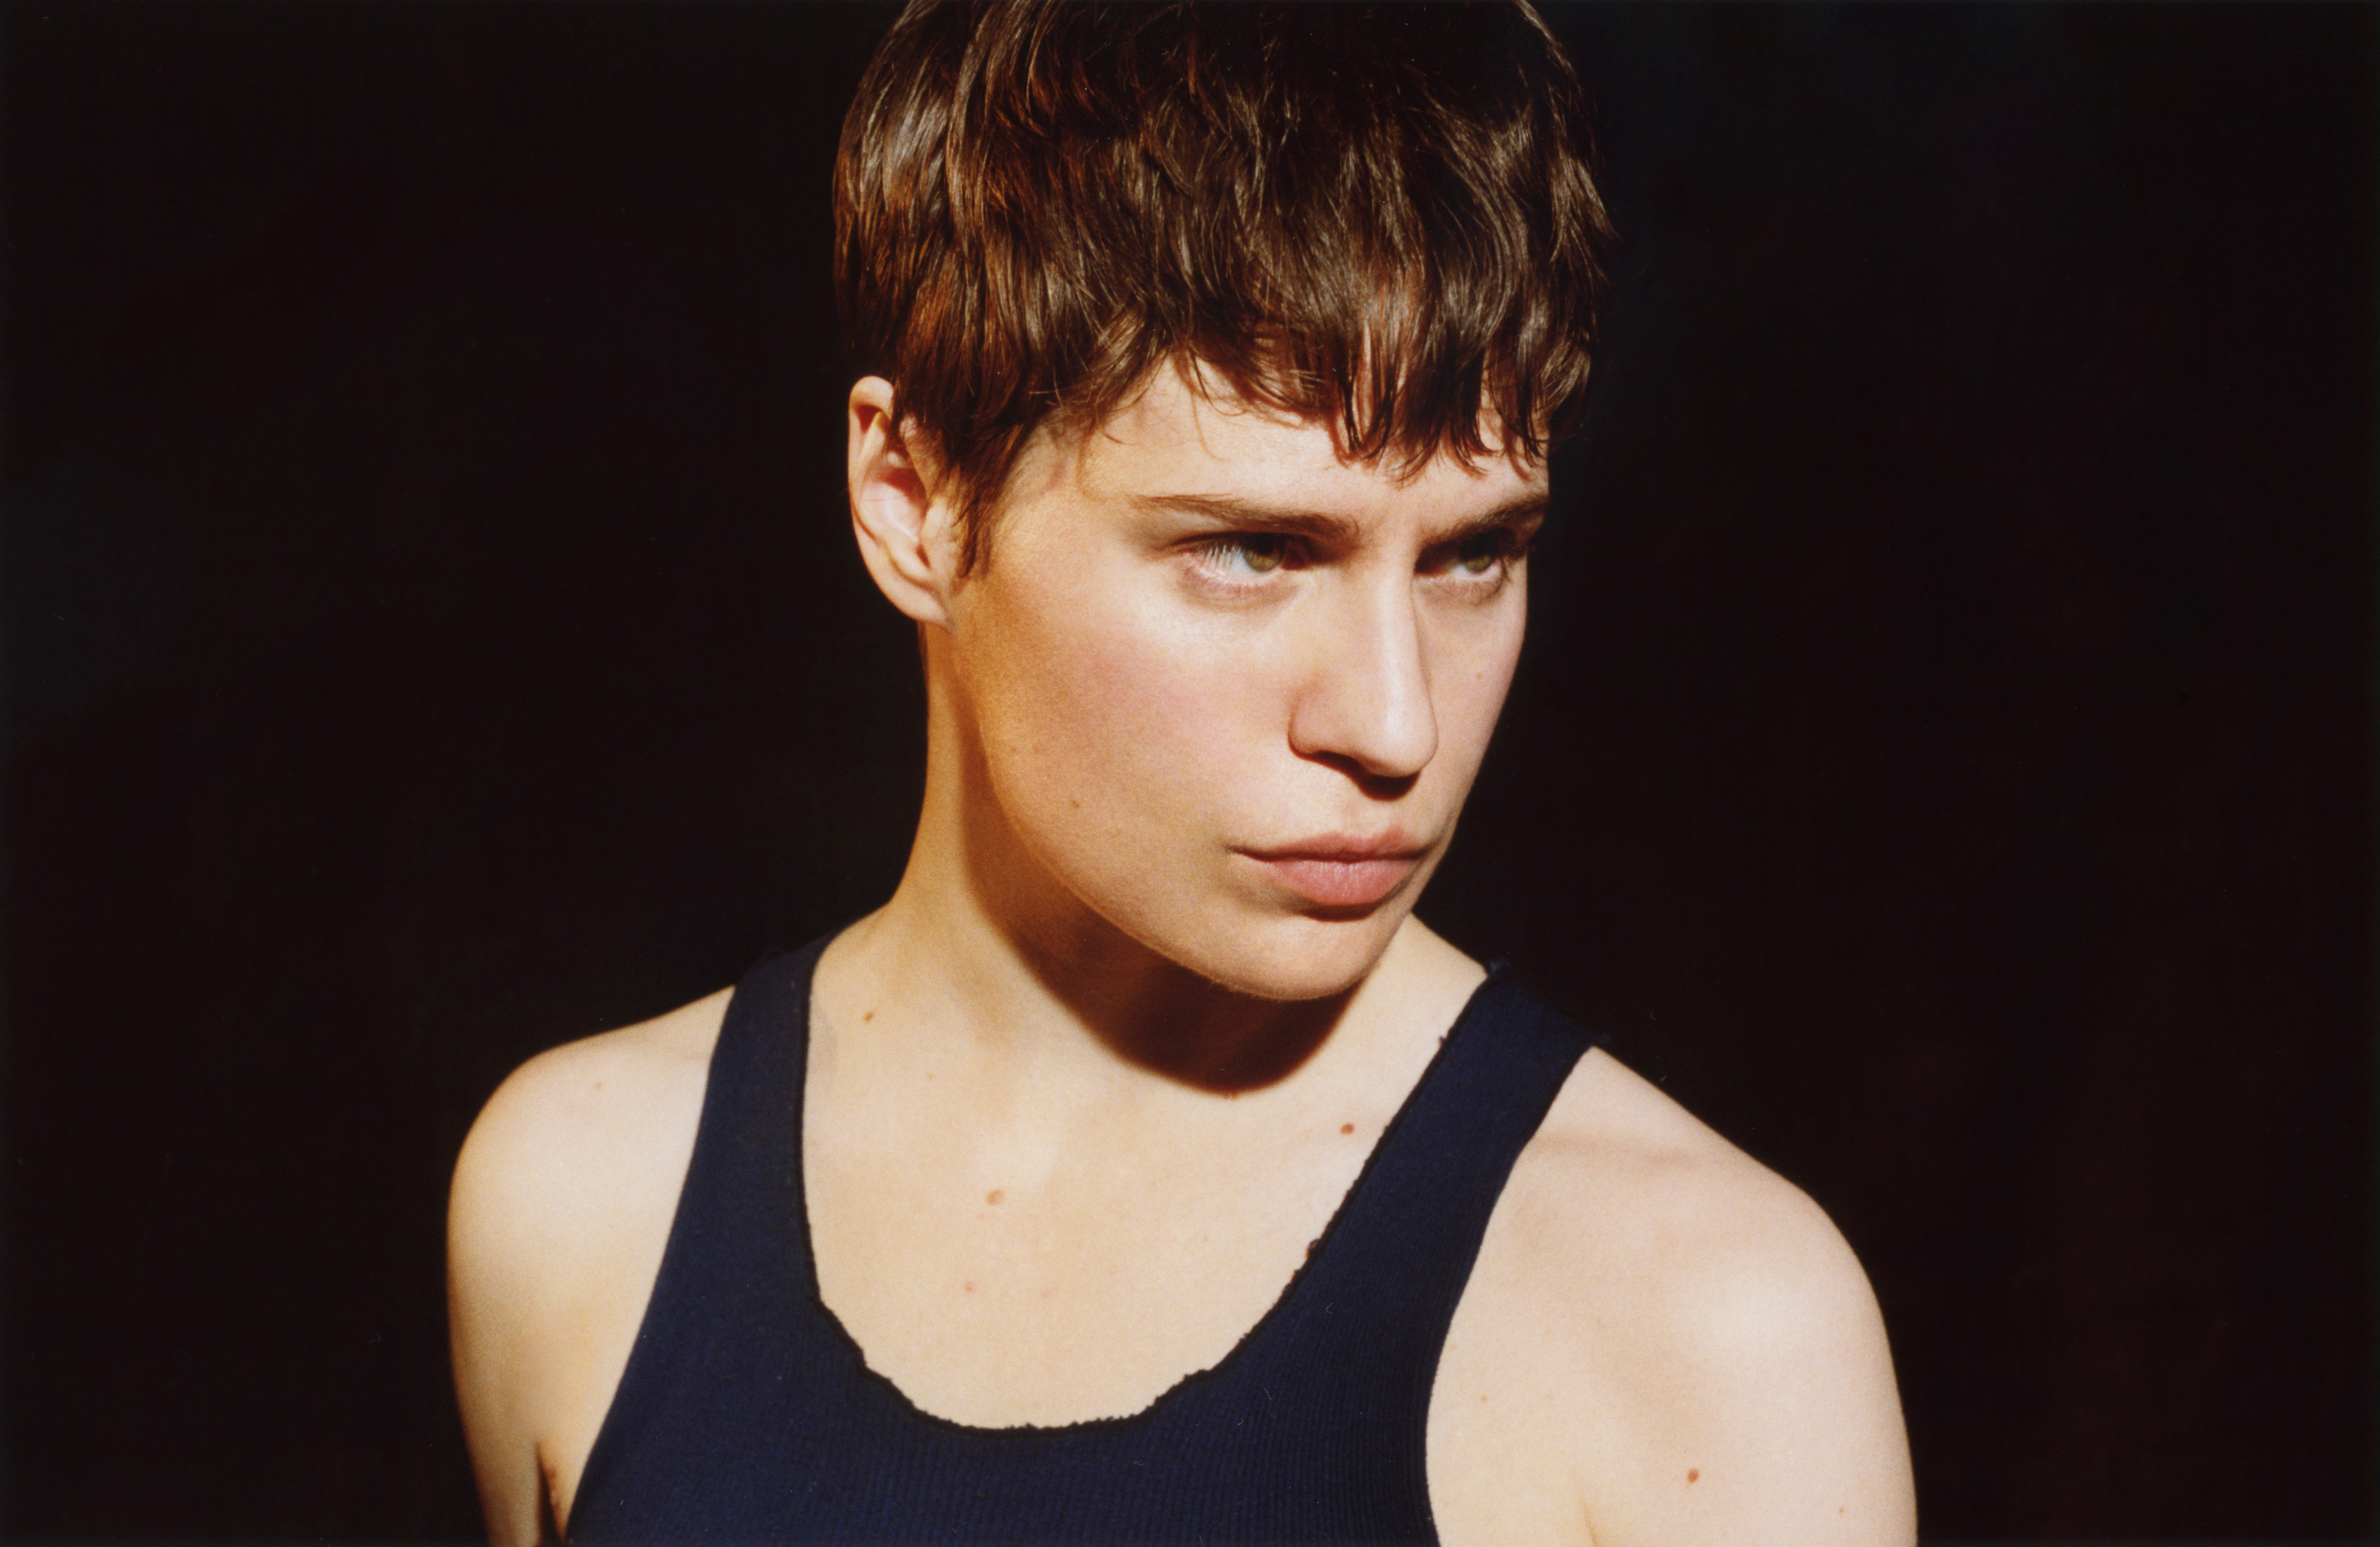 Christine and the Queens, HÃ©loÃ¯se Letissier by Suffo Moncloa